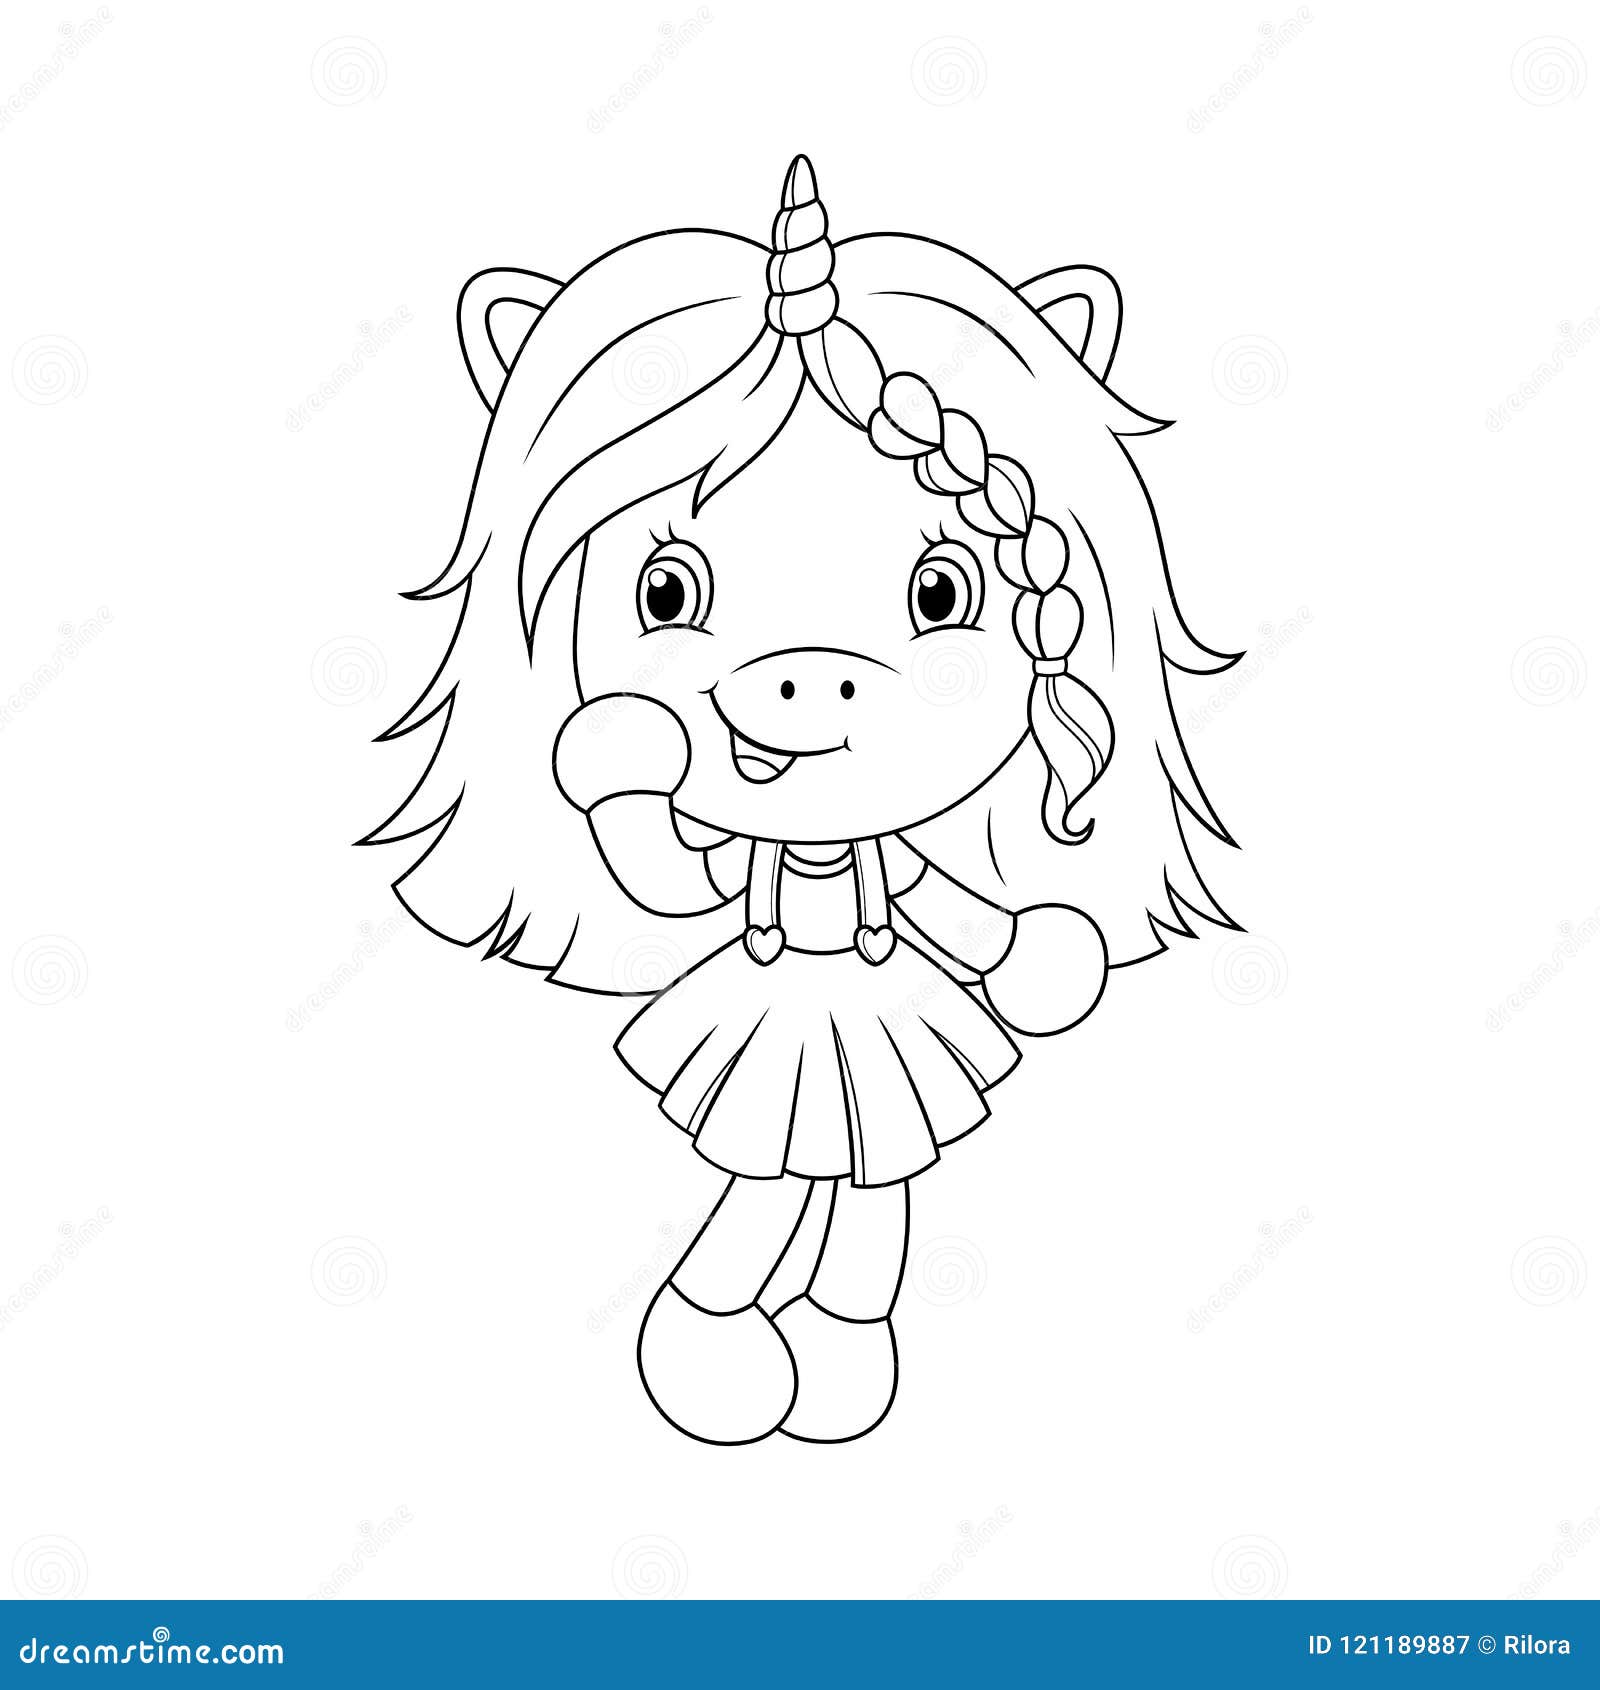 Cute Baby Unicorn Coloring Page For Girls Vector Stock Vector Illustration Of Fairytale Black 121189887